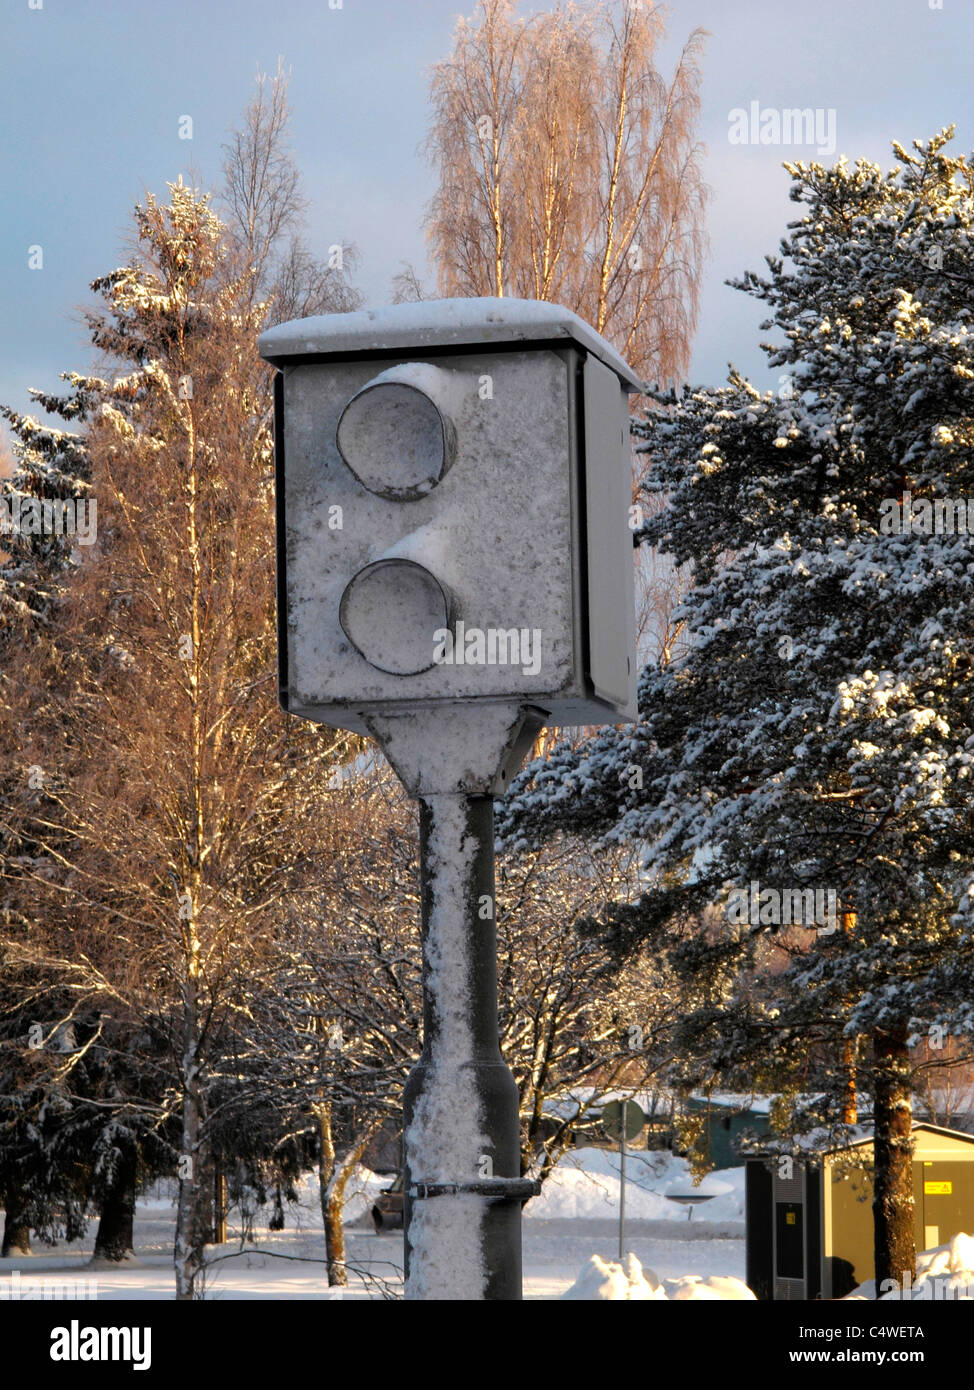 speed control camera in frozen ice Stock Photo